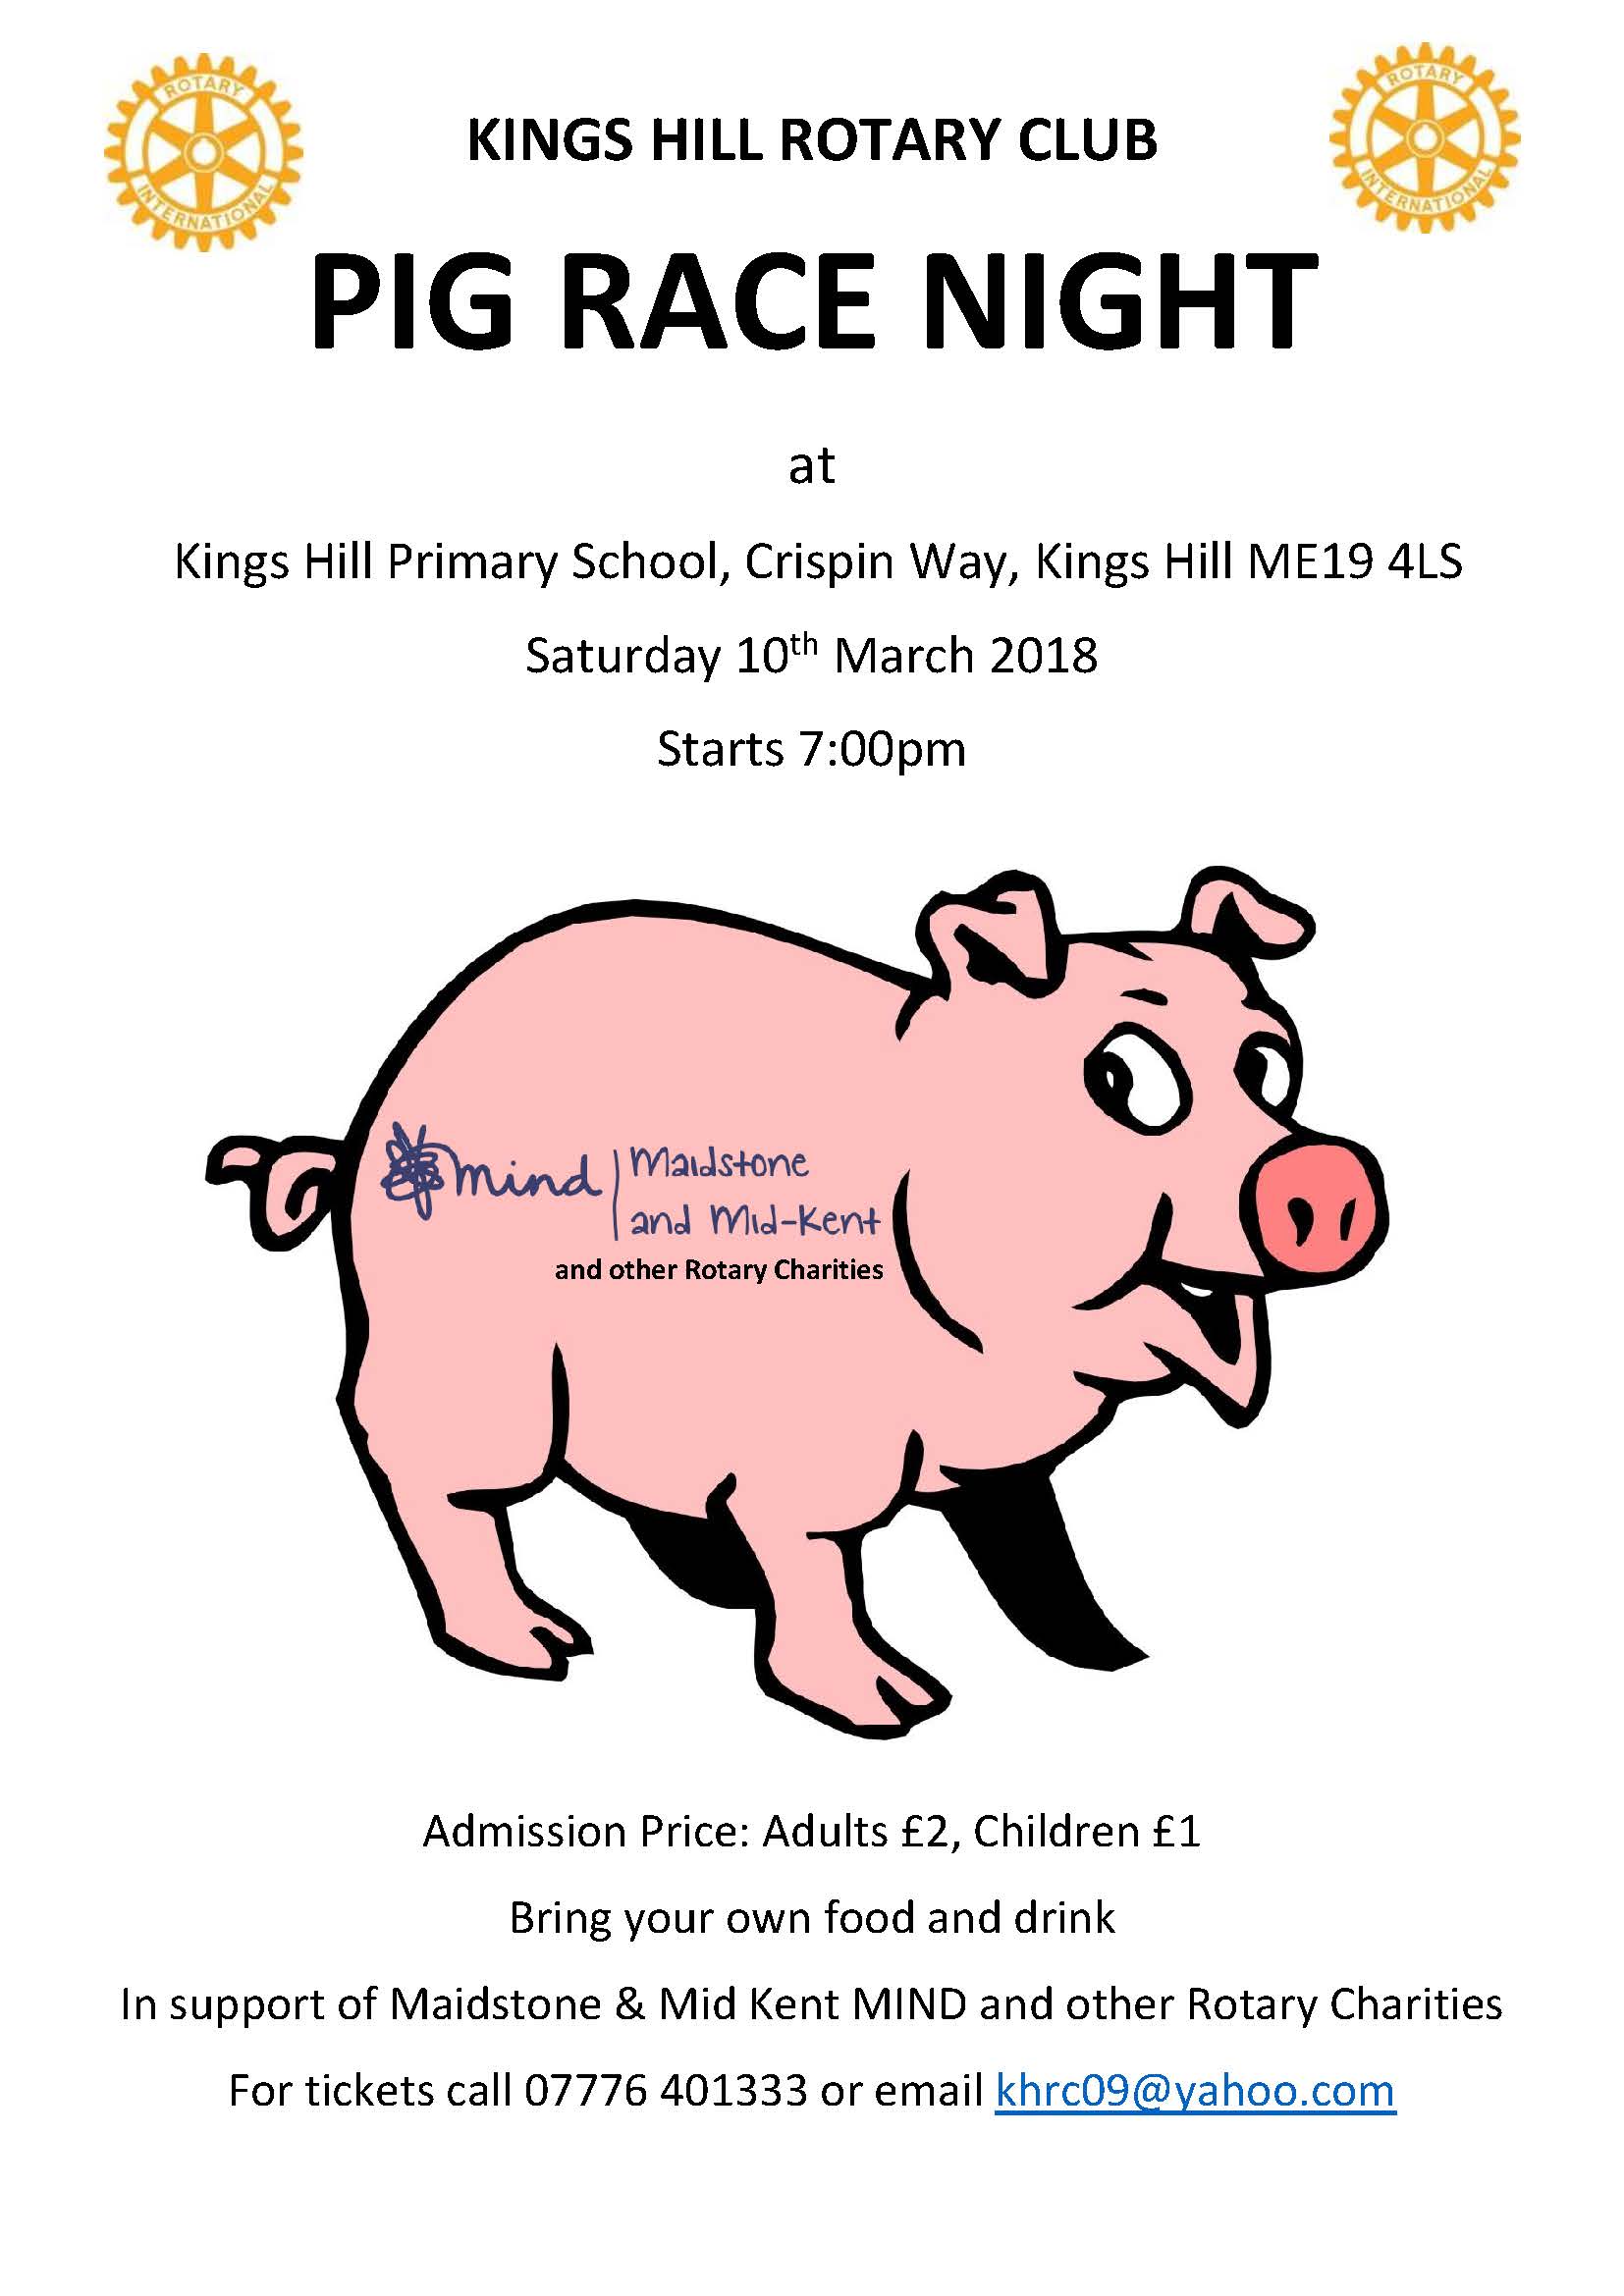 Kings Hill Rotary Club Pig Night Saturday 10th March Starts at 7pm Kings Hill Primary School - ME19 4LS £2 Admission for adults, £1 for Children Bring your own food and drinks. To book, call 07776 401333 or email khrc09@yahoo.com.